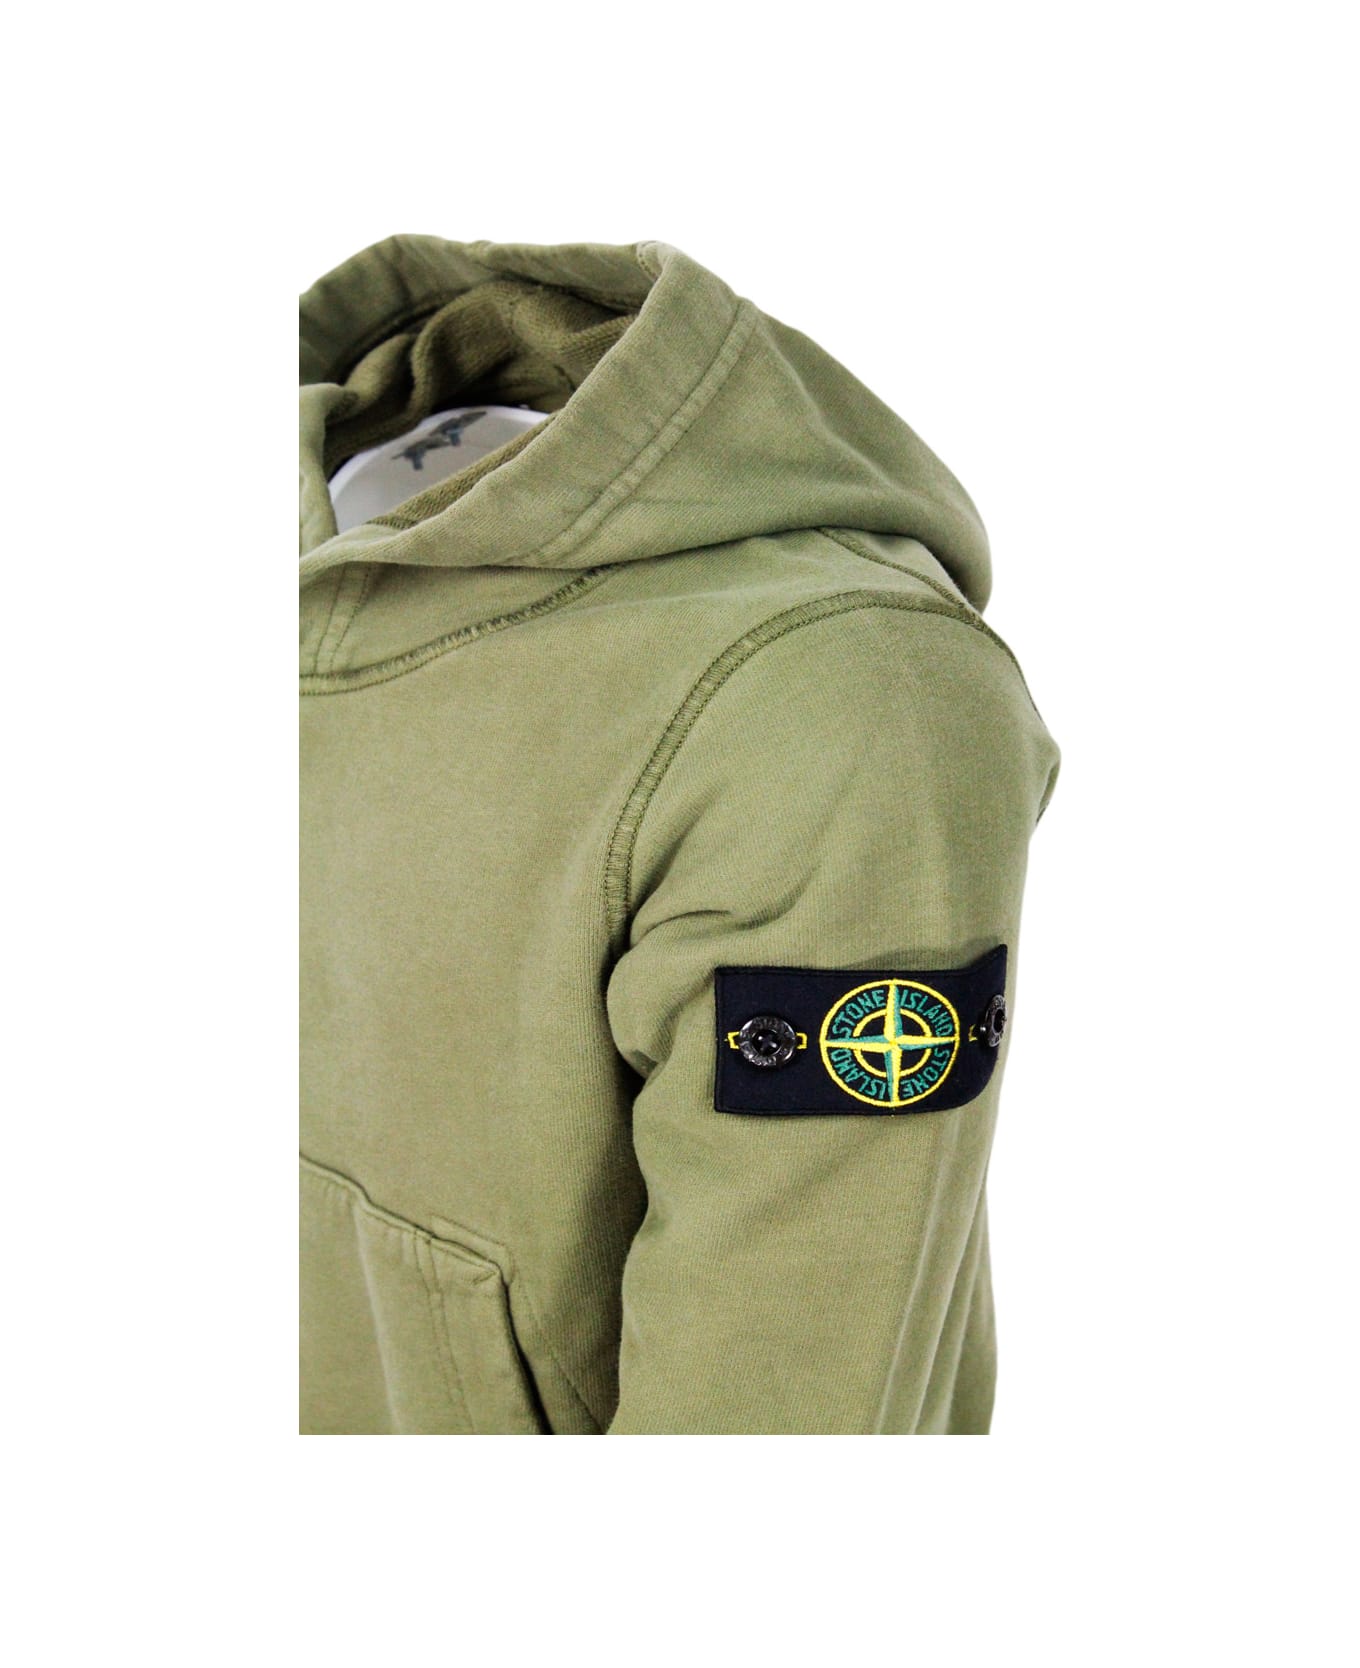 Stone Island Rocky Hooded Sweatshirt With Long Sleeves In Stretch Cotton With Badge On The Left Sleeve - Military ニットウェア＆スウェットシャツ